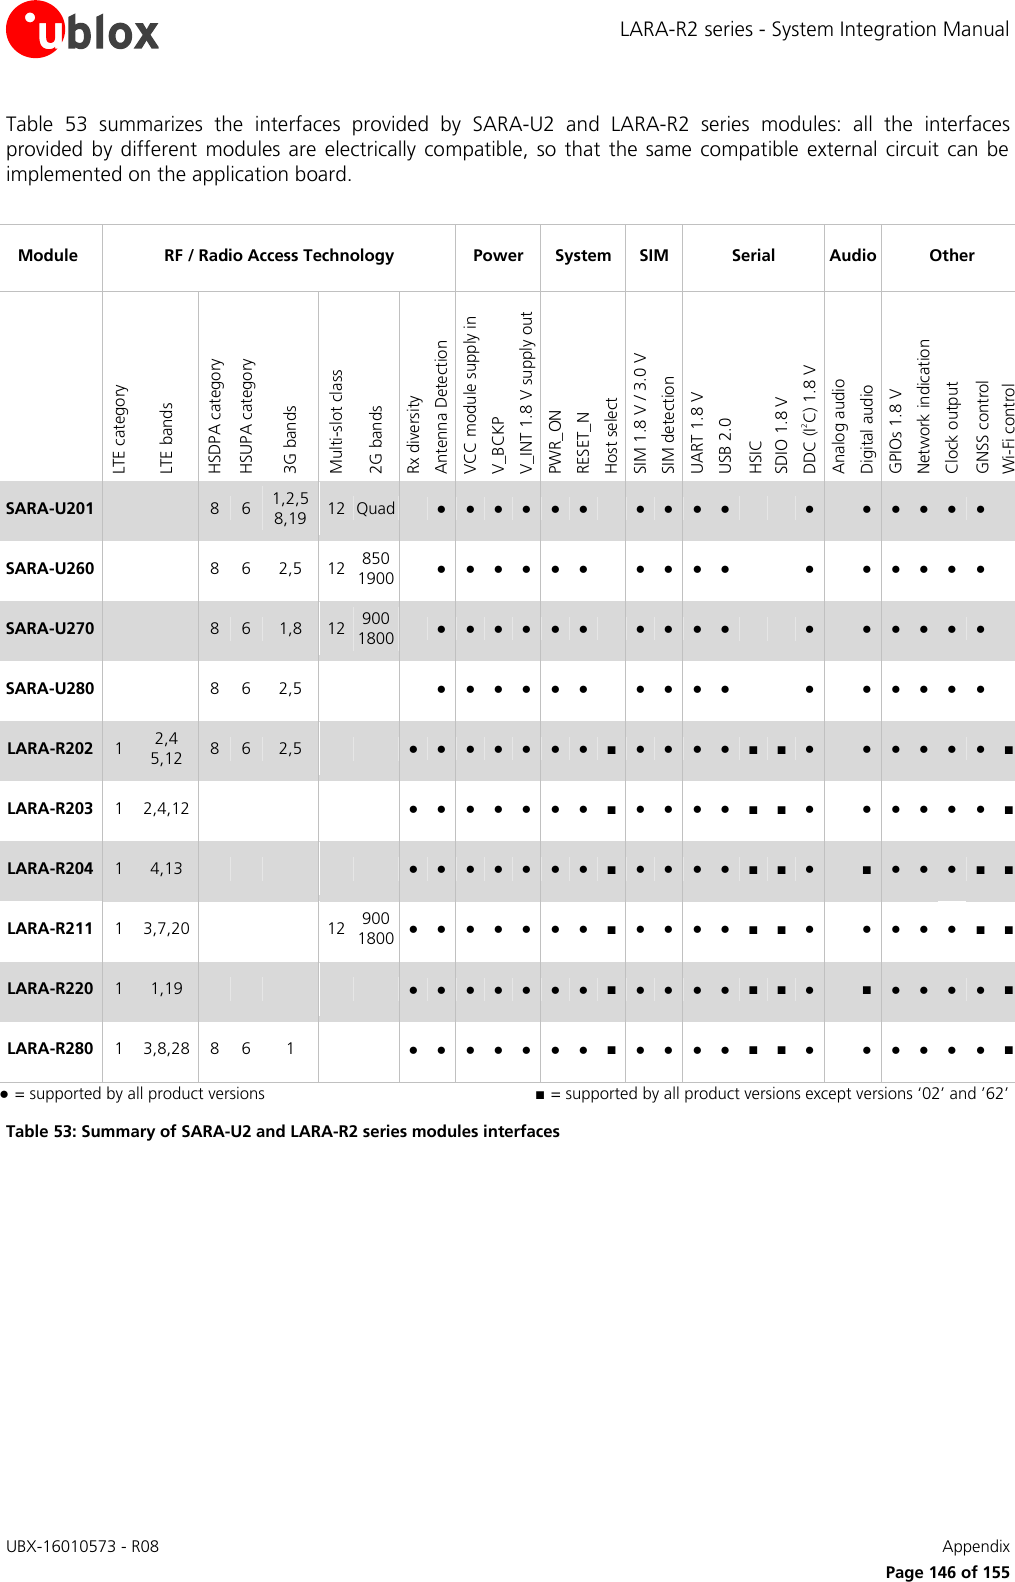 LARA-R2 series - System Integration Manual UBX-16010573 - R08    Appendix      Page 146 of 155 Table  53  summarizes  the  interfaces  provided  by  SARA-U2  and  LARA-R2  series  modules:  all  the  interfaces provided  by  different  modules  are electrically  compatible,  so  that  the same  compatible  external circuit  can  be implemented on the application board.  Module RF / Radio Access Technology Power System SIM Serial Audio Other  LTE category LTE bands HSDPA category HSUPA category 3G bands Multi-slot class 2G bands Rx diversity Antenna Detection VCC module supply in V_BCKP V_INT 1.8 V supply out PWR_ON RESET_N Host select SIM 1.8 V / 3.0 V SIM detection UART 1.8 V USB 2.0  HSIC SDIO 1.8 V DDC (I2C) 1.8 V Analog audio Digital audio  GPIOs 1.8 V Network indication Clock output GNSS control Wi-Fi control SARA-U201   8 6 1,2,5 8,19 12 Quad  ● ● ● ● ● ●  ● ● ● ●   ●  ● ● ● ● ●  SARA-U260   8 6 2,5 12 850 1900  ● ● ● ● ● ●  ● ● ● ●   ●  ● ● ● ● ●  SARA-U270   8 6 1,8 12 900 1800  ● ● ● ● ● ●  ● ● ● ●   ●  ● ● ● ● ●  SARA-U280   8 6 2,5    ● ● ● ● ● ●  ● ● ● ●   ●  ● ● ● ● ●  LARA-R202 1 2,4 5,12 8 6 2,5   ● ● ● ● ● ● ● ■ ● ● ● ● ■ ■ ●  ● ● ● ● ● ■ LARA-R203 1 2,4,12      ● ● ● ● ● ● ● ■ ● ● ● ● ■ ■ ●  ● ● ● ● ● ■ LARA-R204 1 4,13      ● ● ● ● ● ● ● ■ ● ● ● ● ■ ■ ●  ■ ● ● ● ■ ■ LARA-R211 1 3,7,20    12 900 1800 ● ● ● ● ● ● ● ■ ● ● ● ● ■ ■ ●  ● ● ● ● ■ ■ LARA-R220 1 1,19      ● ● ● ● ● ● ● ■ ● ● ● ● ■ ■ ●  ■ ● ● ● ● ■ LARA-R280 1 3,8,28 8 6 1   ● ● ● ● ● ● ● ■ ● ● ● ● ■ ■ ●  ● ● ● ● ● ■ ●  = supported by all product versions    ■  = supported by all product versions except versions ‘02’ and ’62’ Table 53: Summary of SARA-U2 and LARA-R2 series modules interfaces  